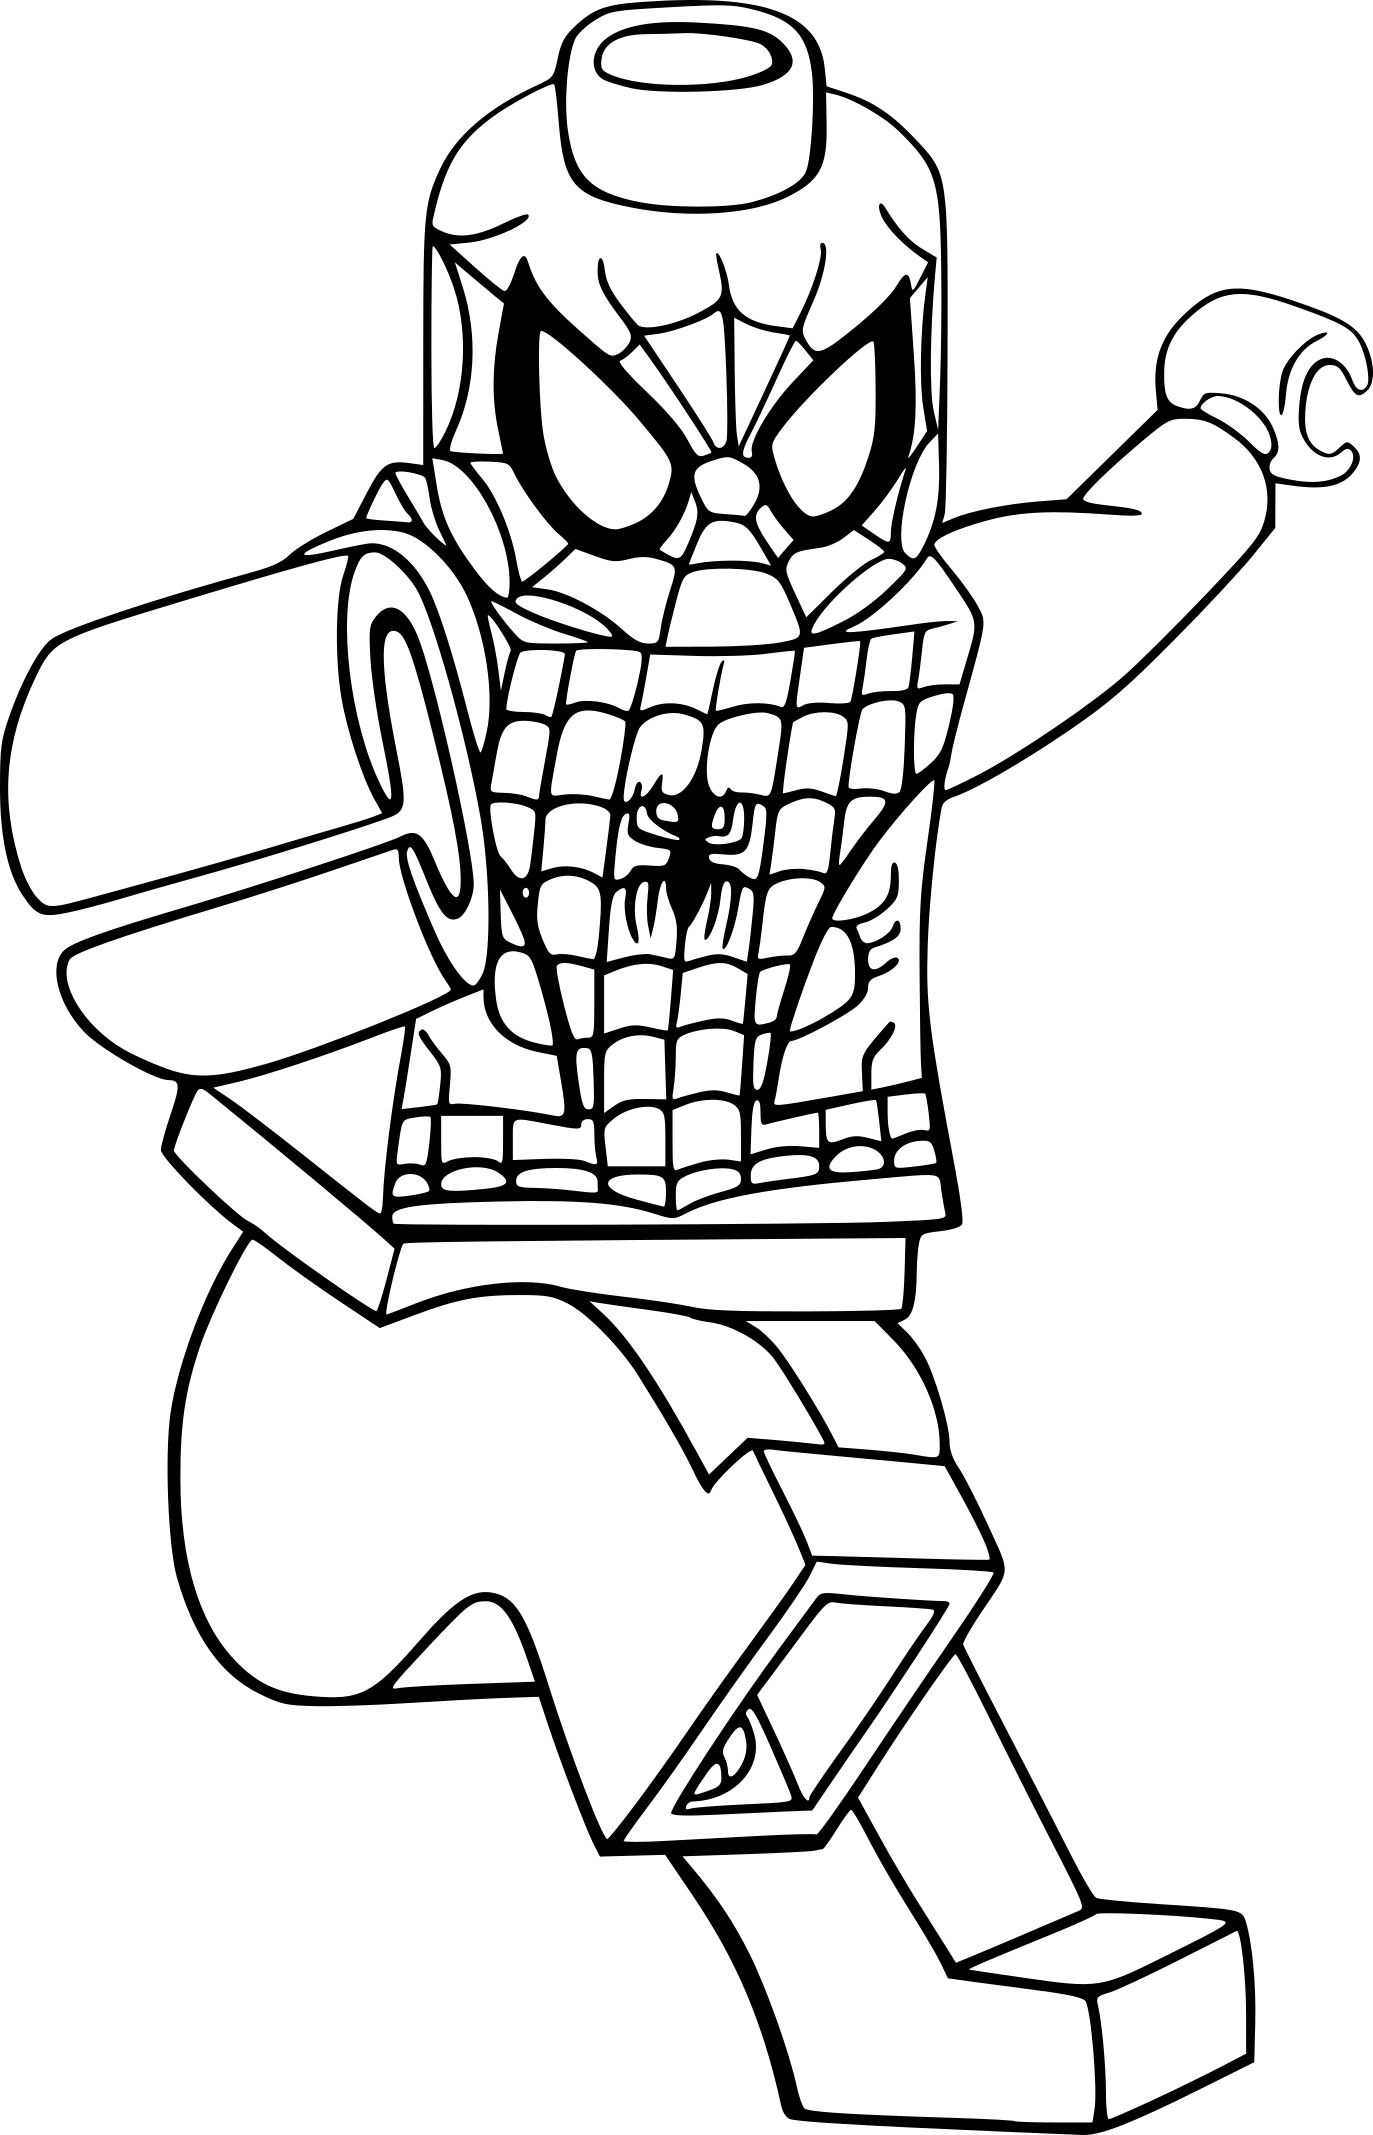 Pin By Anelka On Coloriages Sympas  Spiderman Coloring tout Coloriage Spidermann